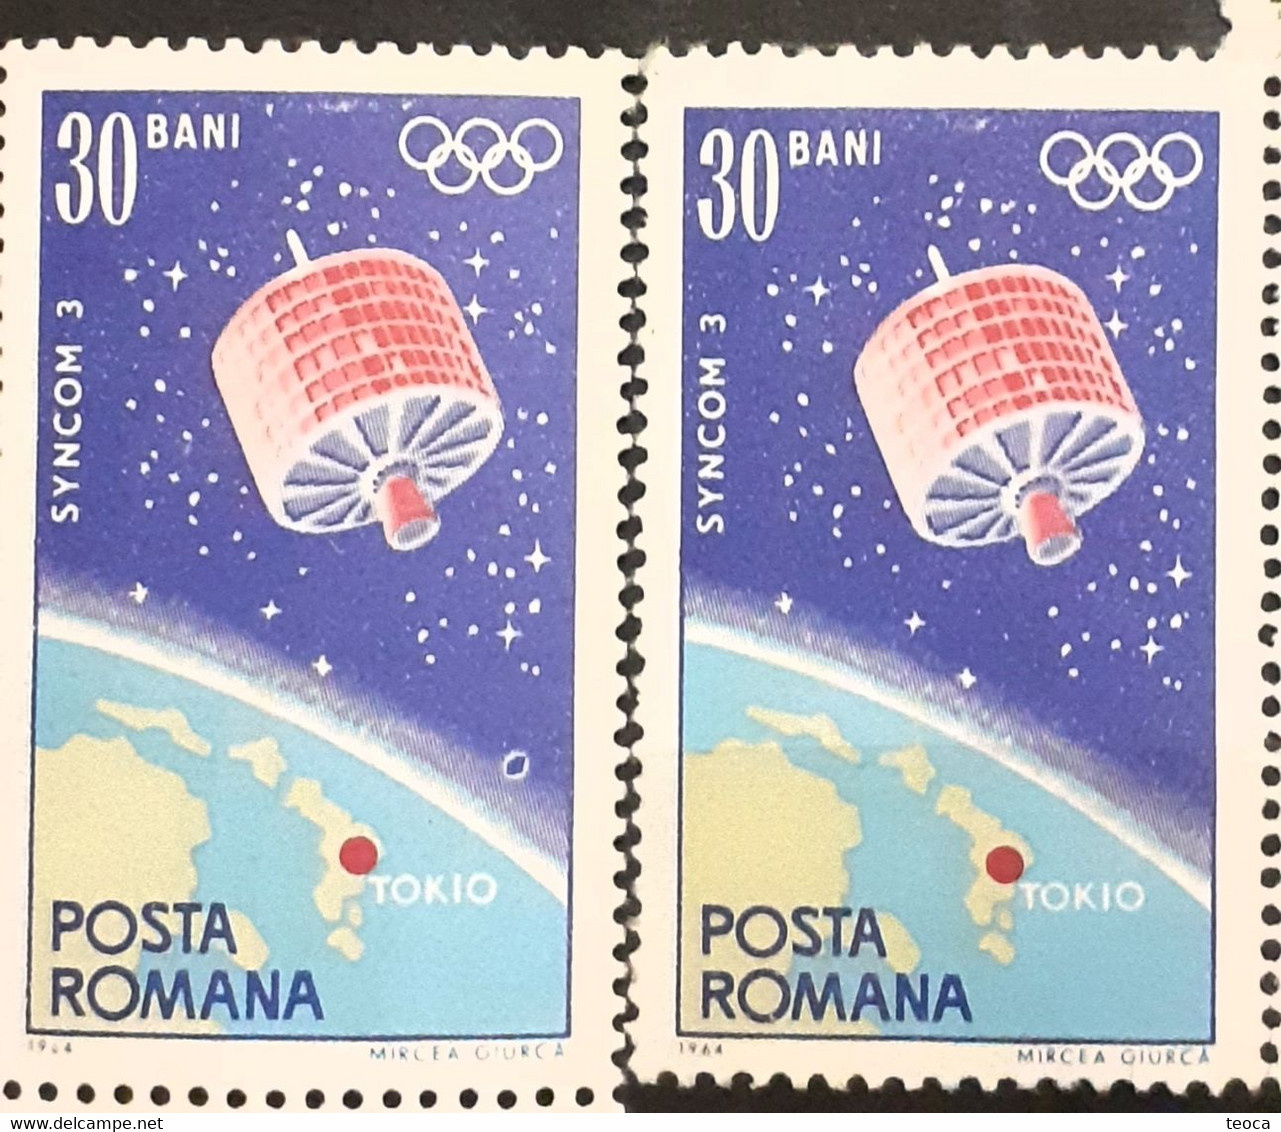 Space Cosmos Errors Romania 1964 Mi 2369  Printed With Circle Printing Under The Spaceship Cosmos Space Mnh - Errors, Freaks & Oddities (EFO)